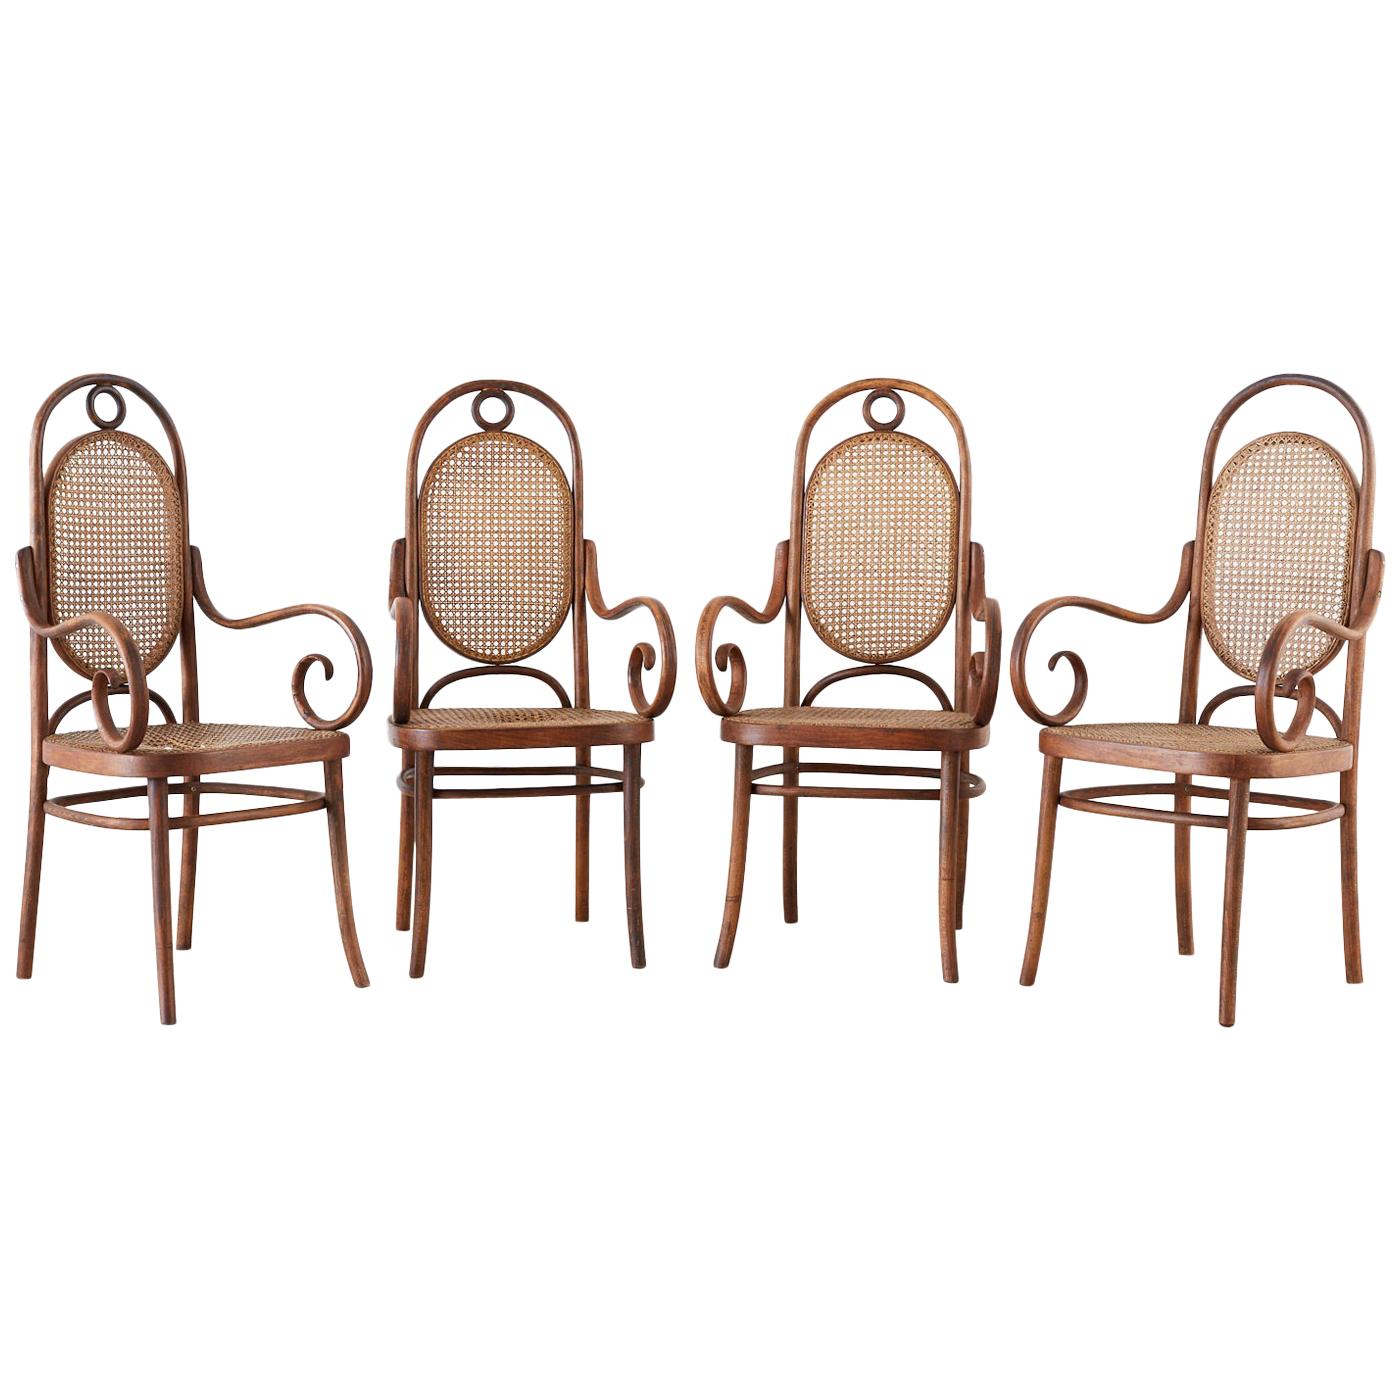 Set of Four Thonet No. 17 Bentwood and Cane Armchairs